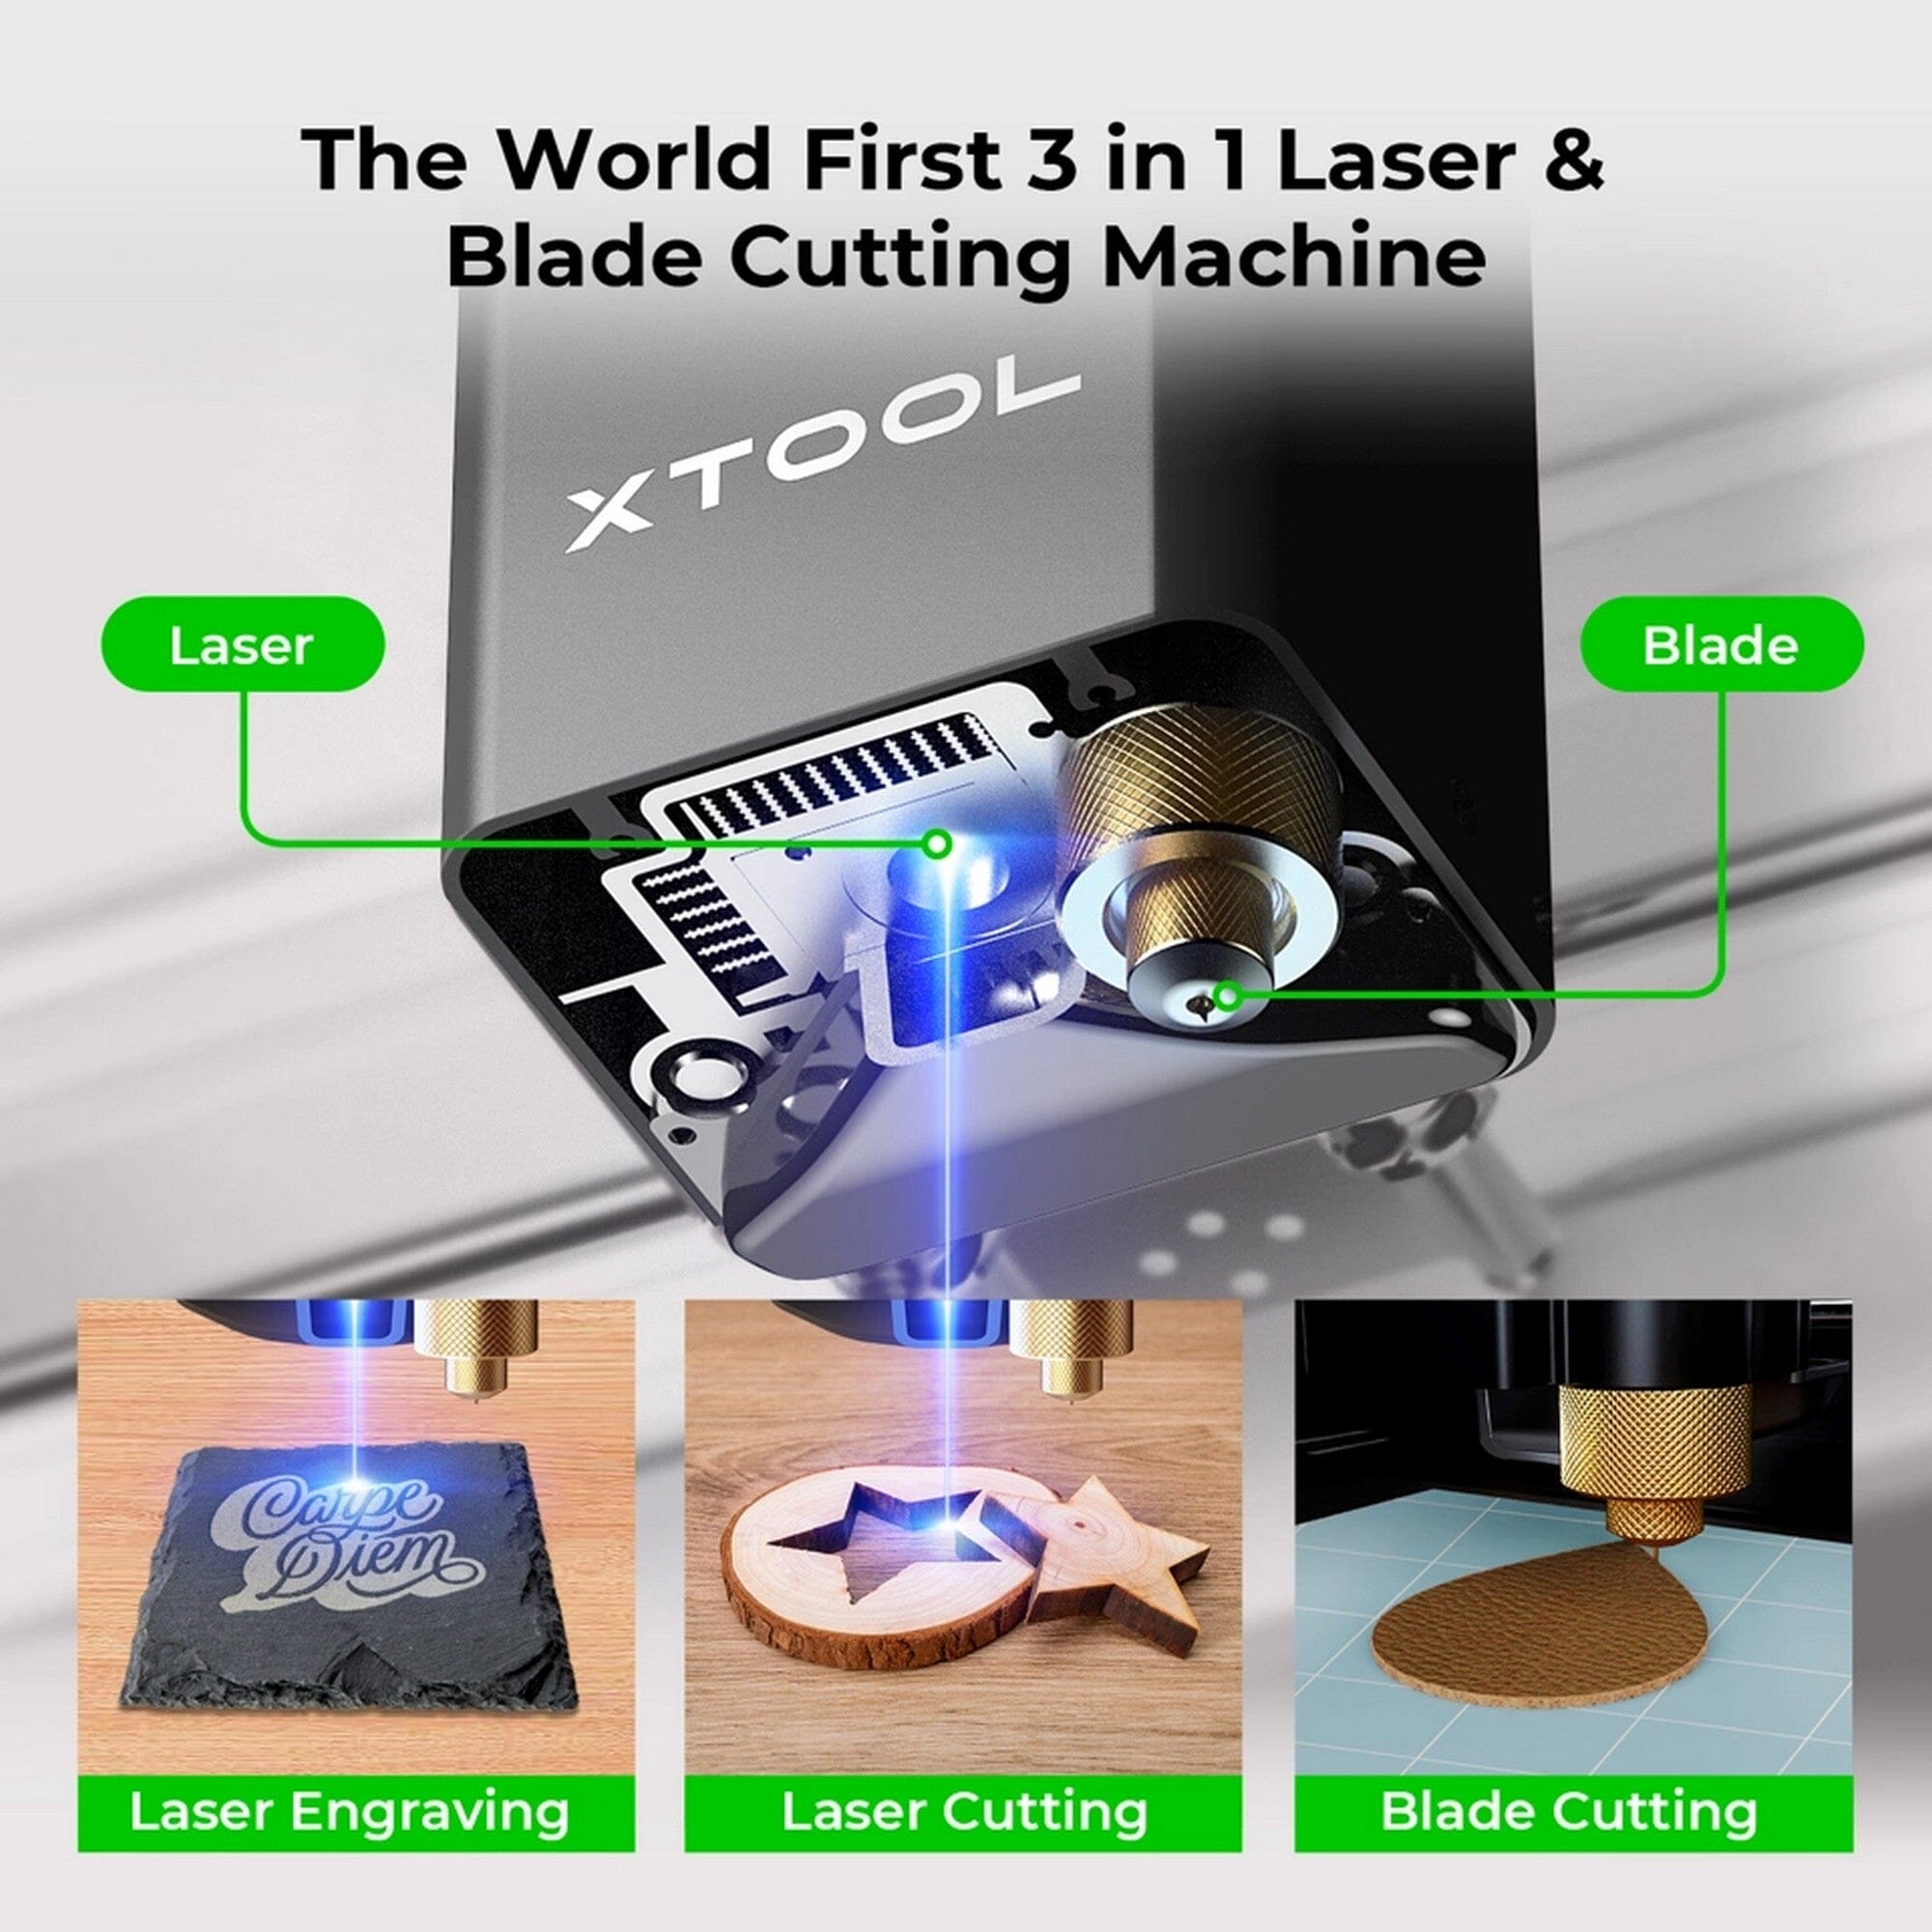 xTool M1 - Mini but Powerful Hybrid Laser & Blade Cutter by